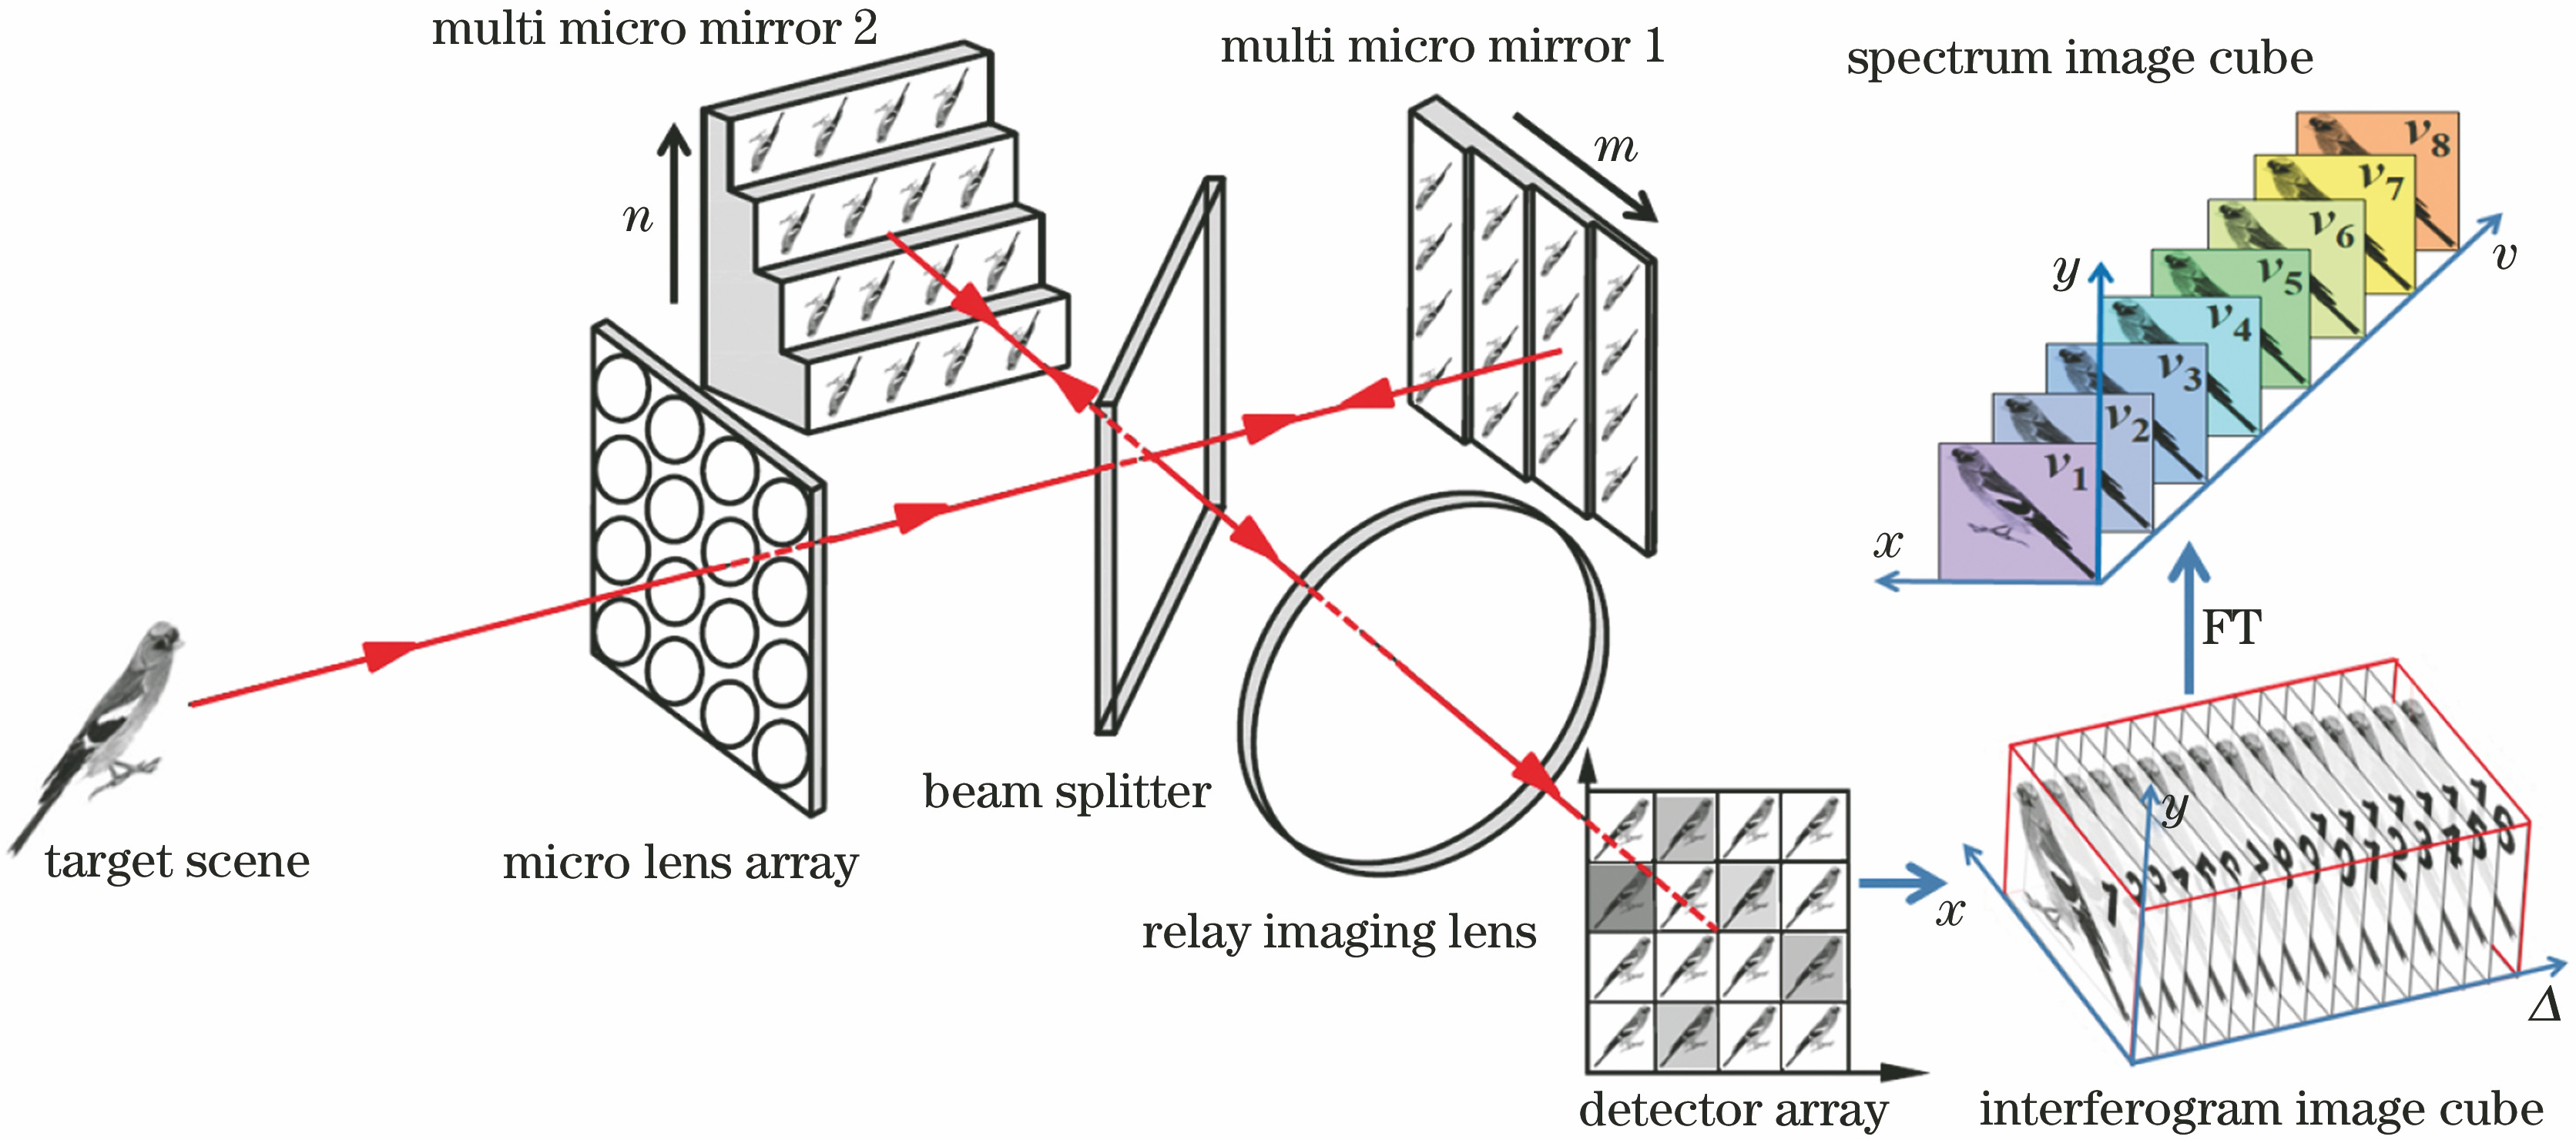 Schematic diagram of snapshot interference imaging spectrometer